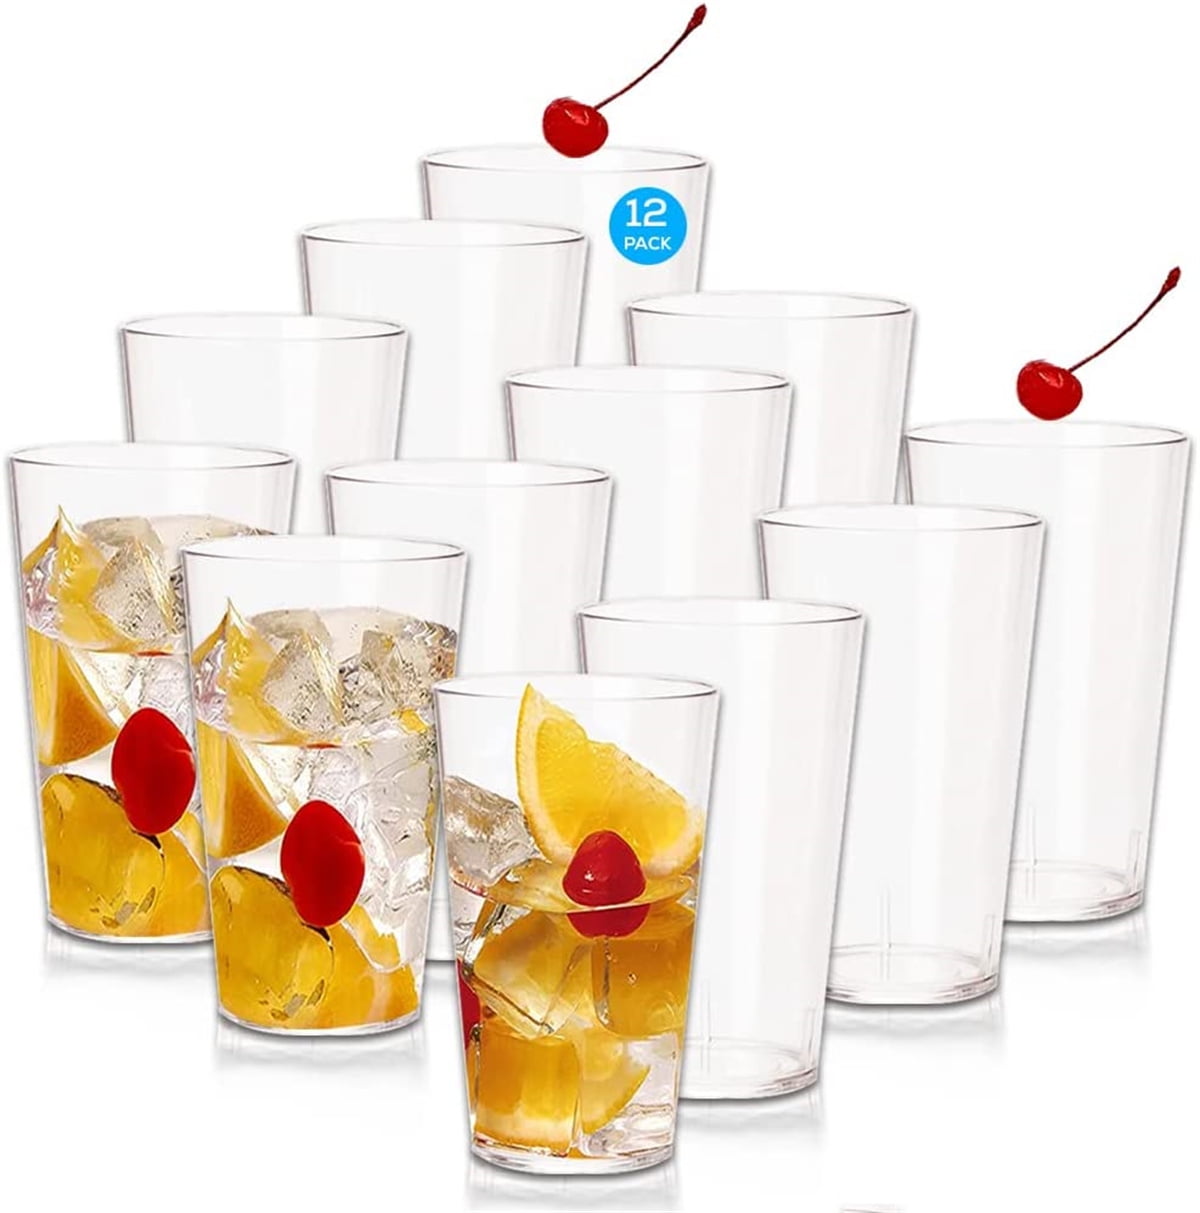 Casewin 11-Ounce Plastic Tumblers (Set of 12), Plastic Drinking Glasses,  Restaurant-Style Tumblers, Commercial-Grade Cups, Stackable, BPA-Free